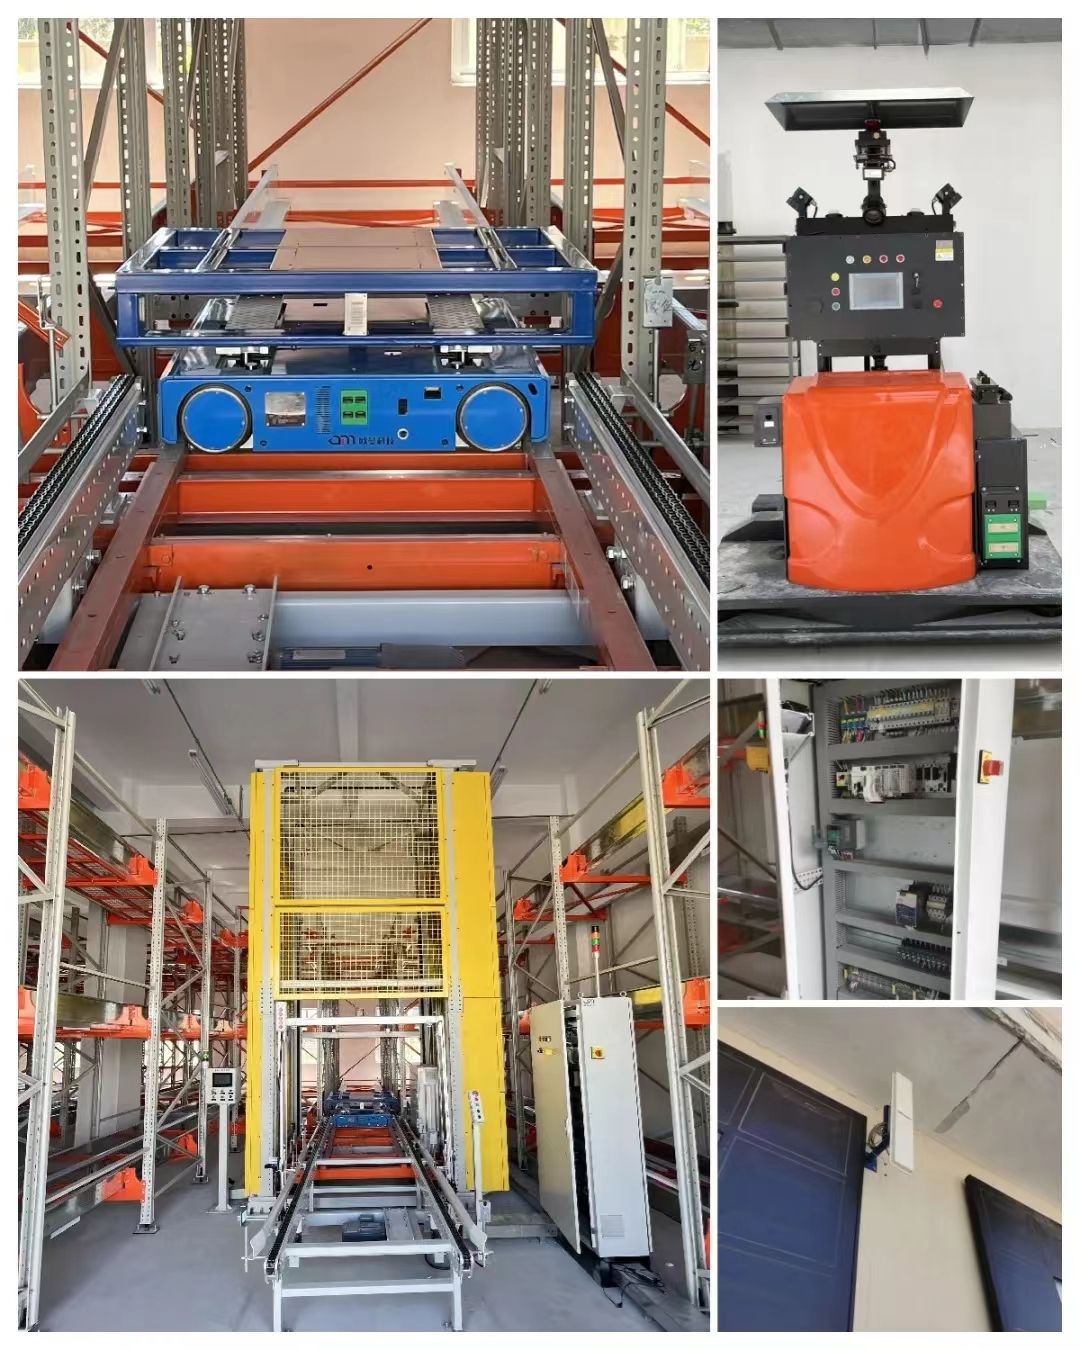 4way automatic shuttle racking system (2)